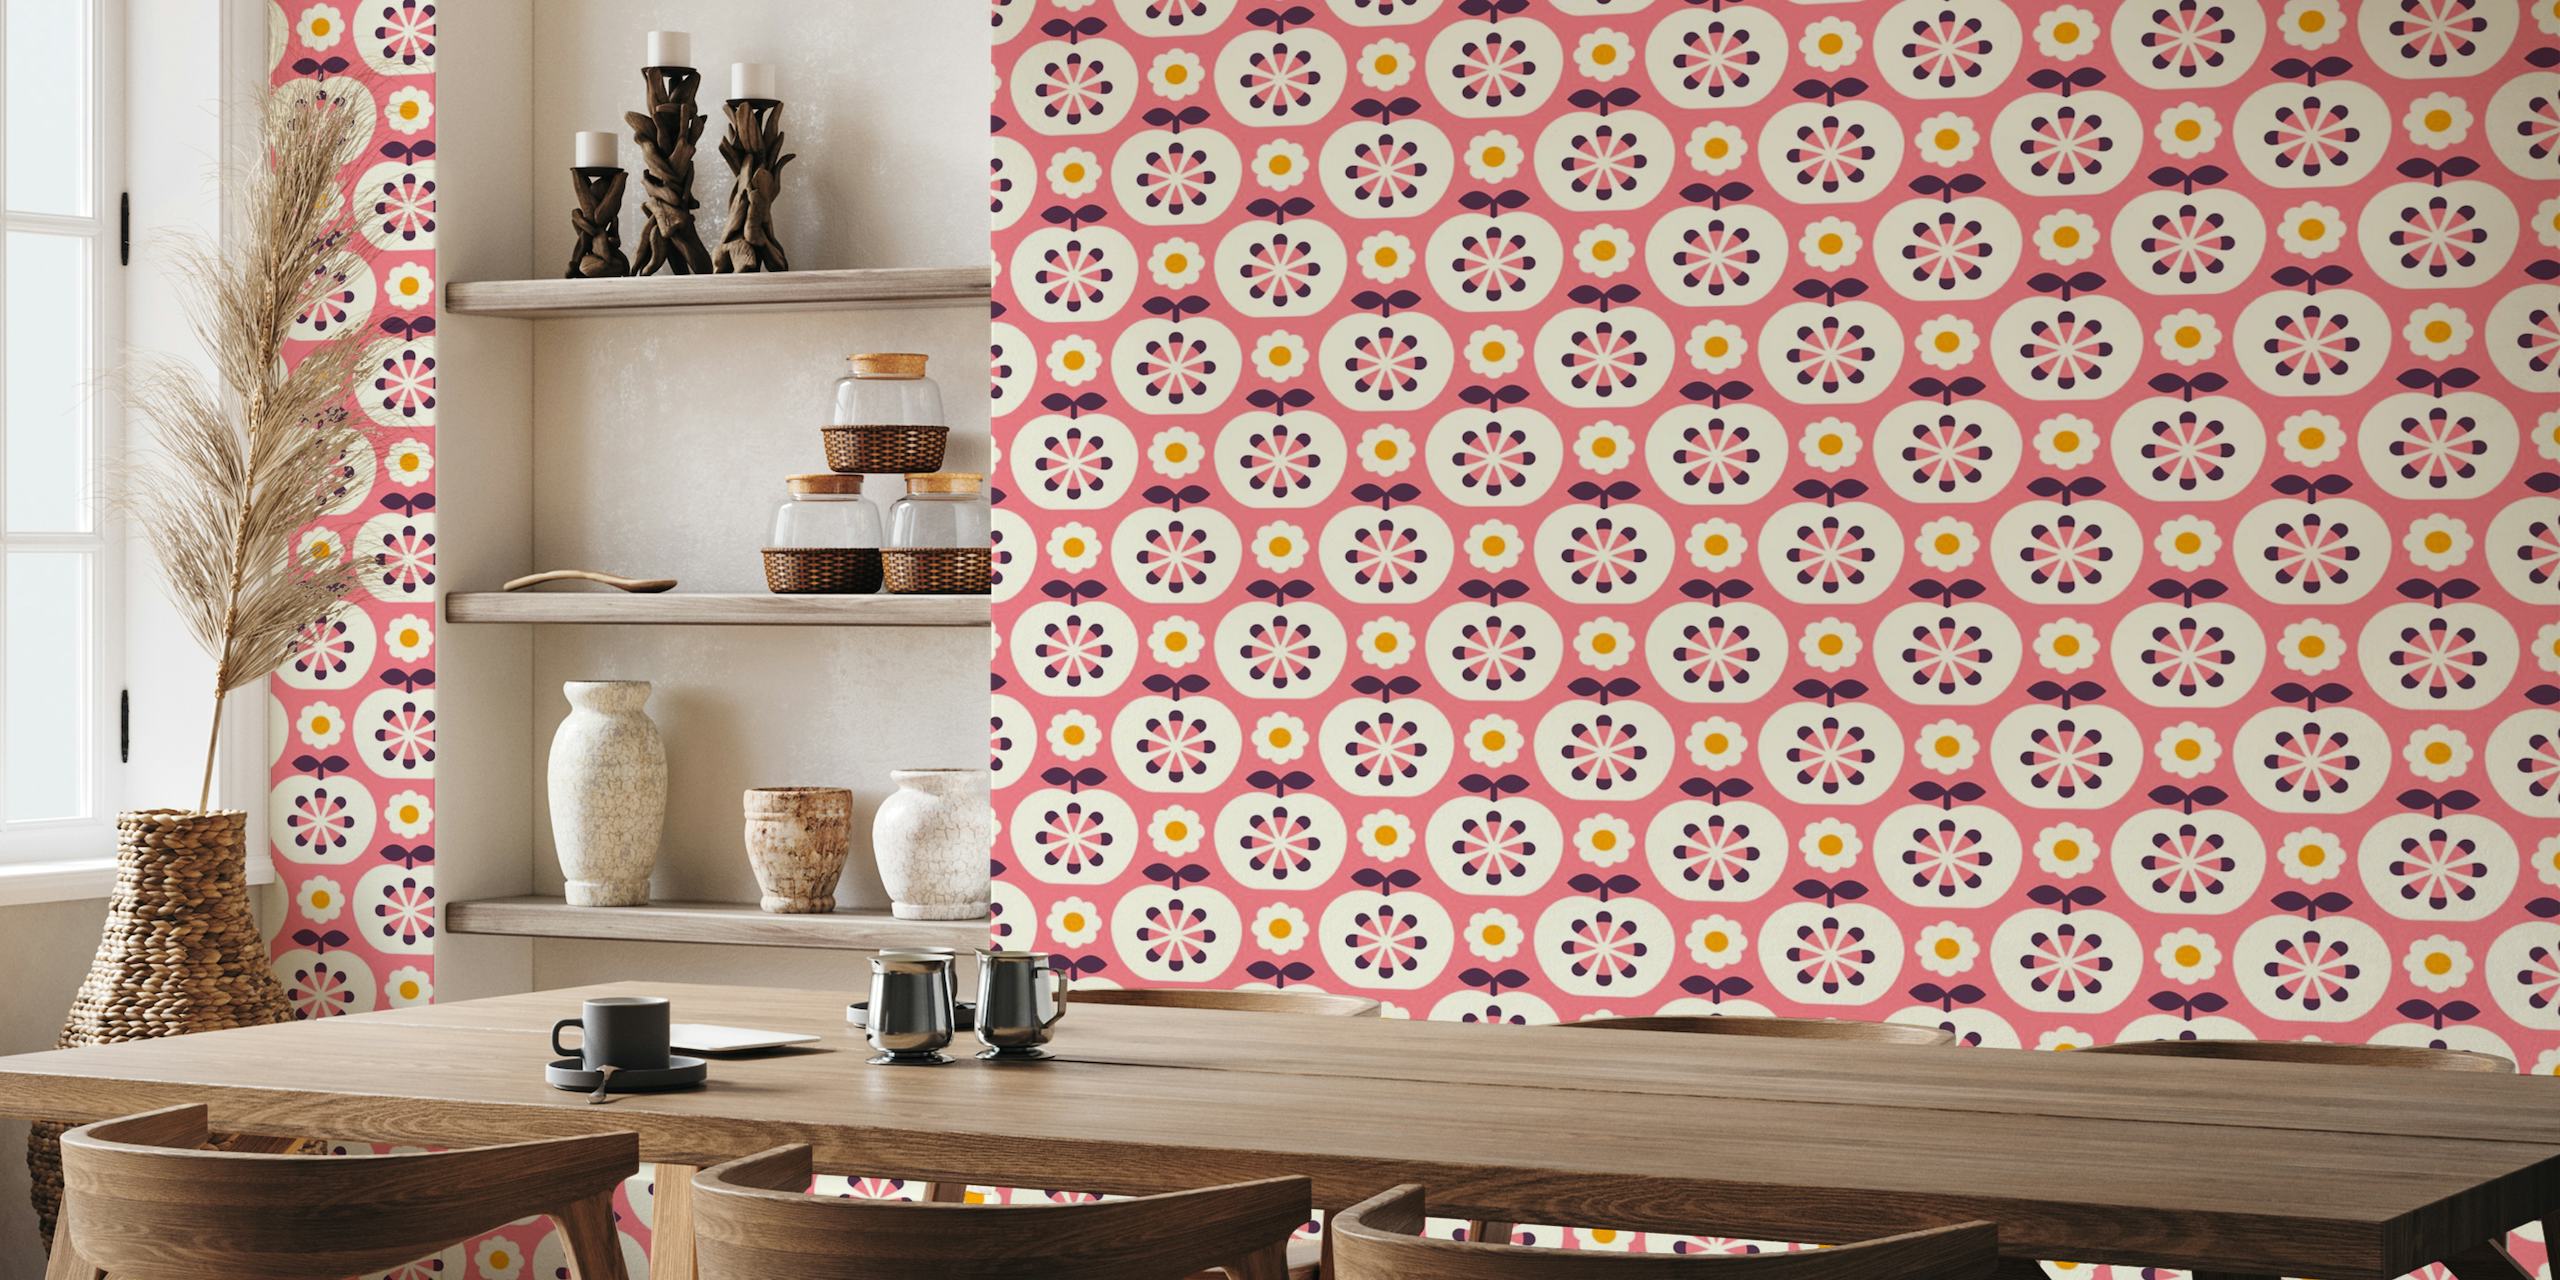 Retro style apples and flowers pattern in pink for wall mural